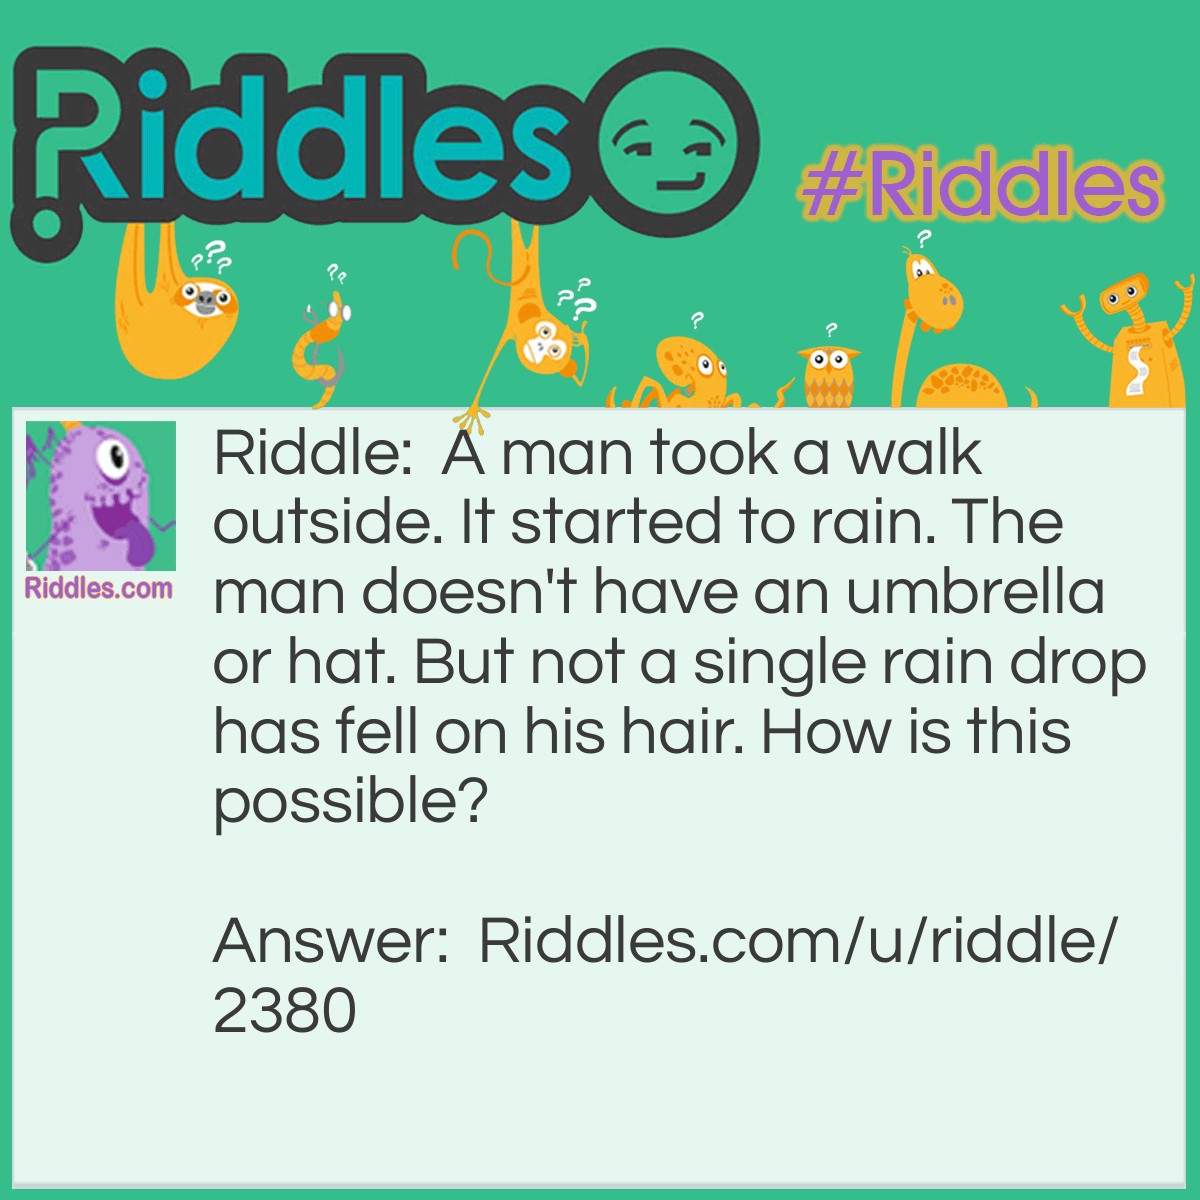 Riddle: A man took a walk outside. It started to rain. The man doesn't have an umbrella or hat. But not a single rain drop has fell on his hair. How is this possible? Answer: The man is bald. (You probably heard of this joke before)